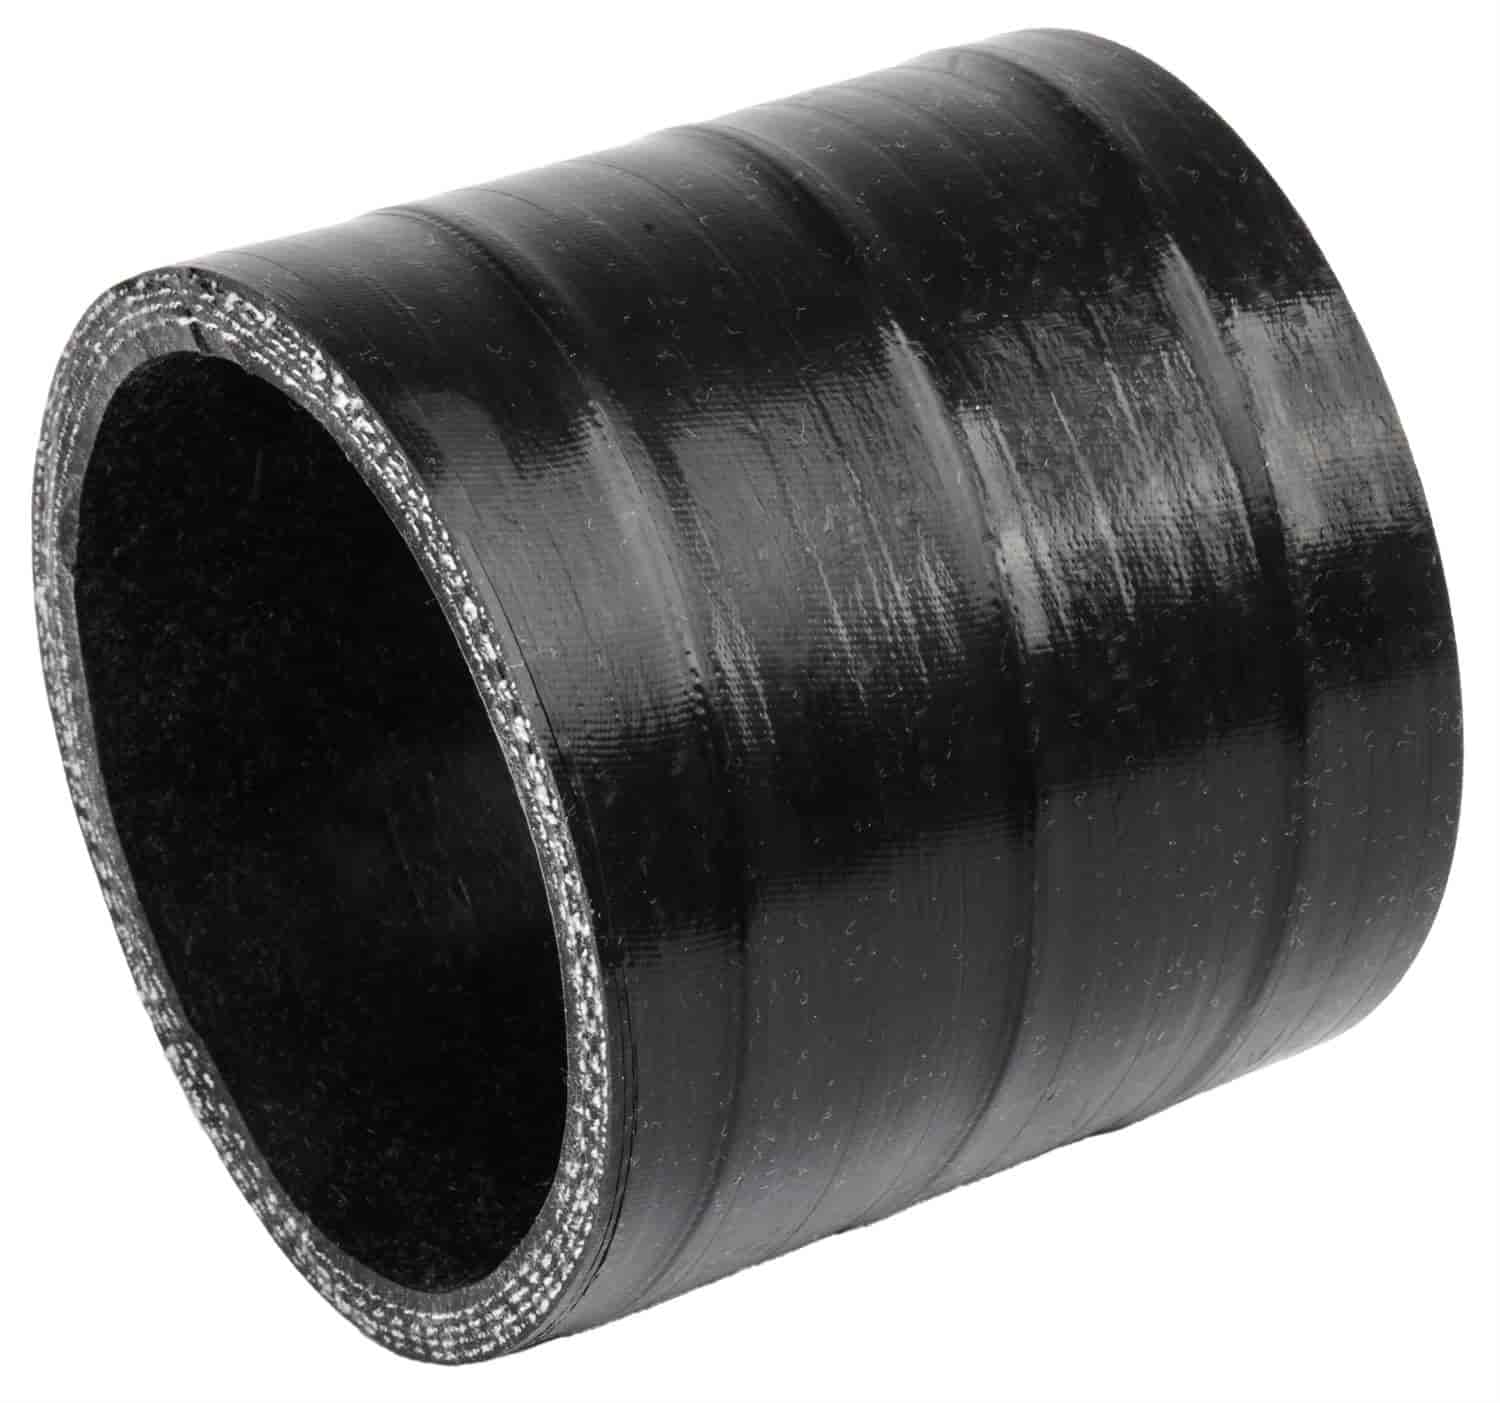 Straight Silicone Hose Connector 2.75" I.D. x 3" Long